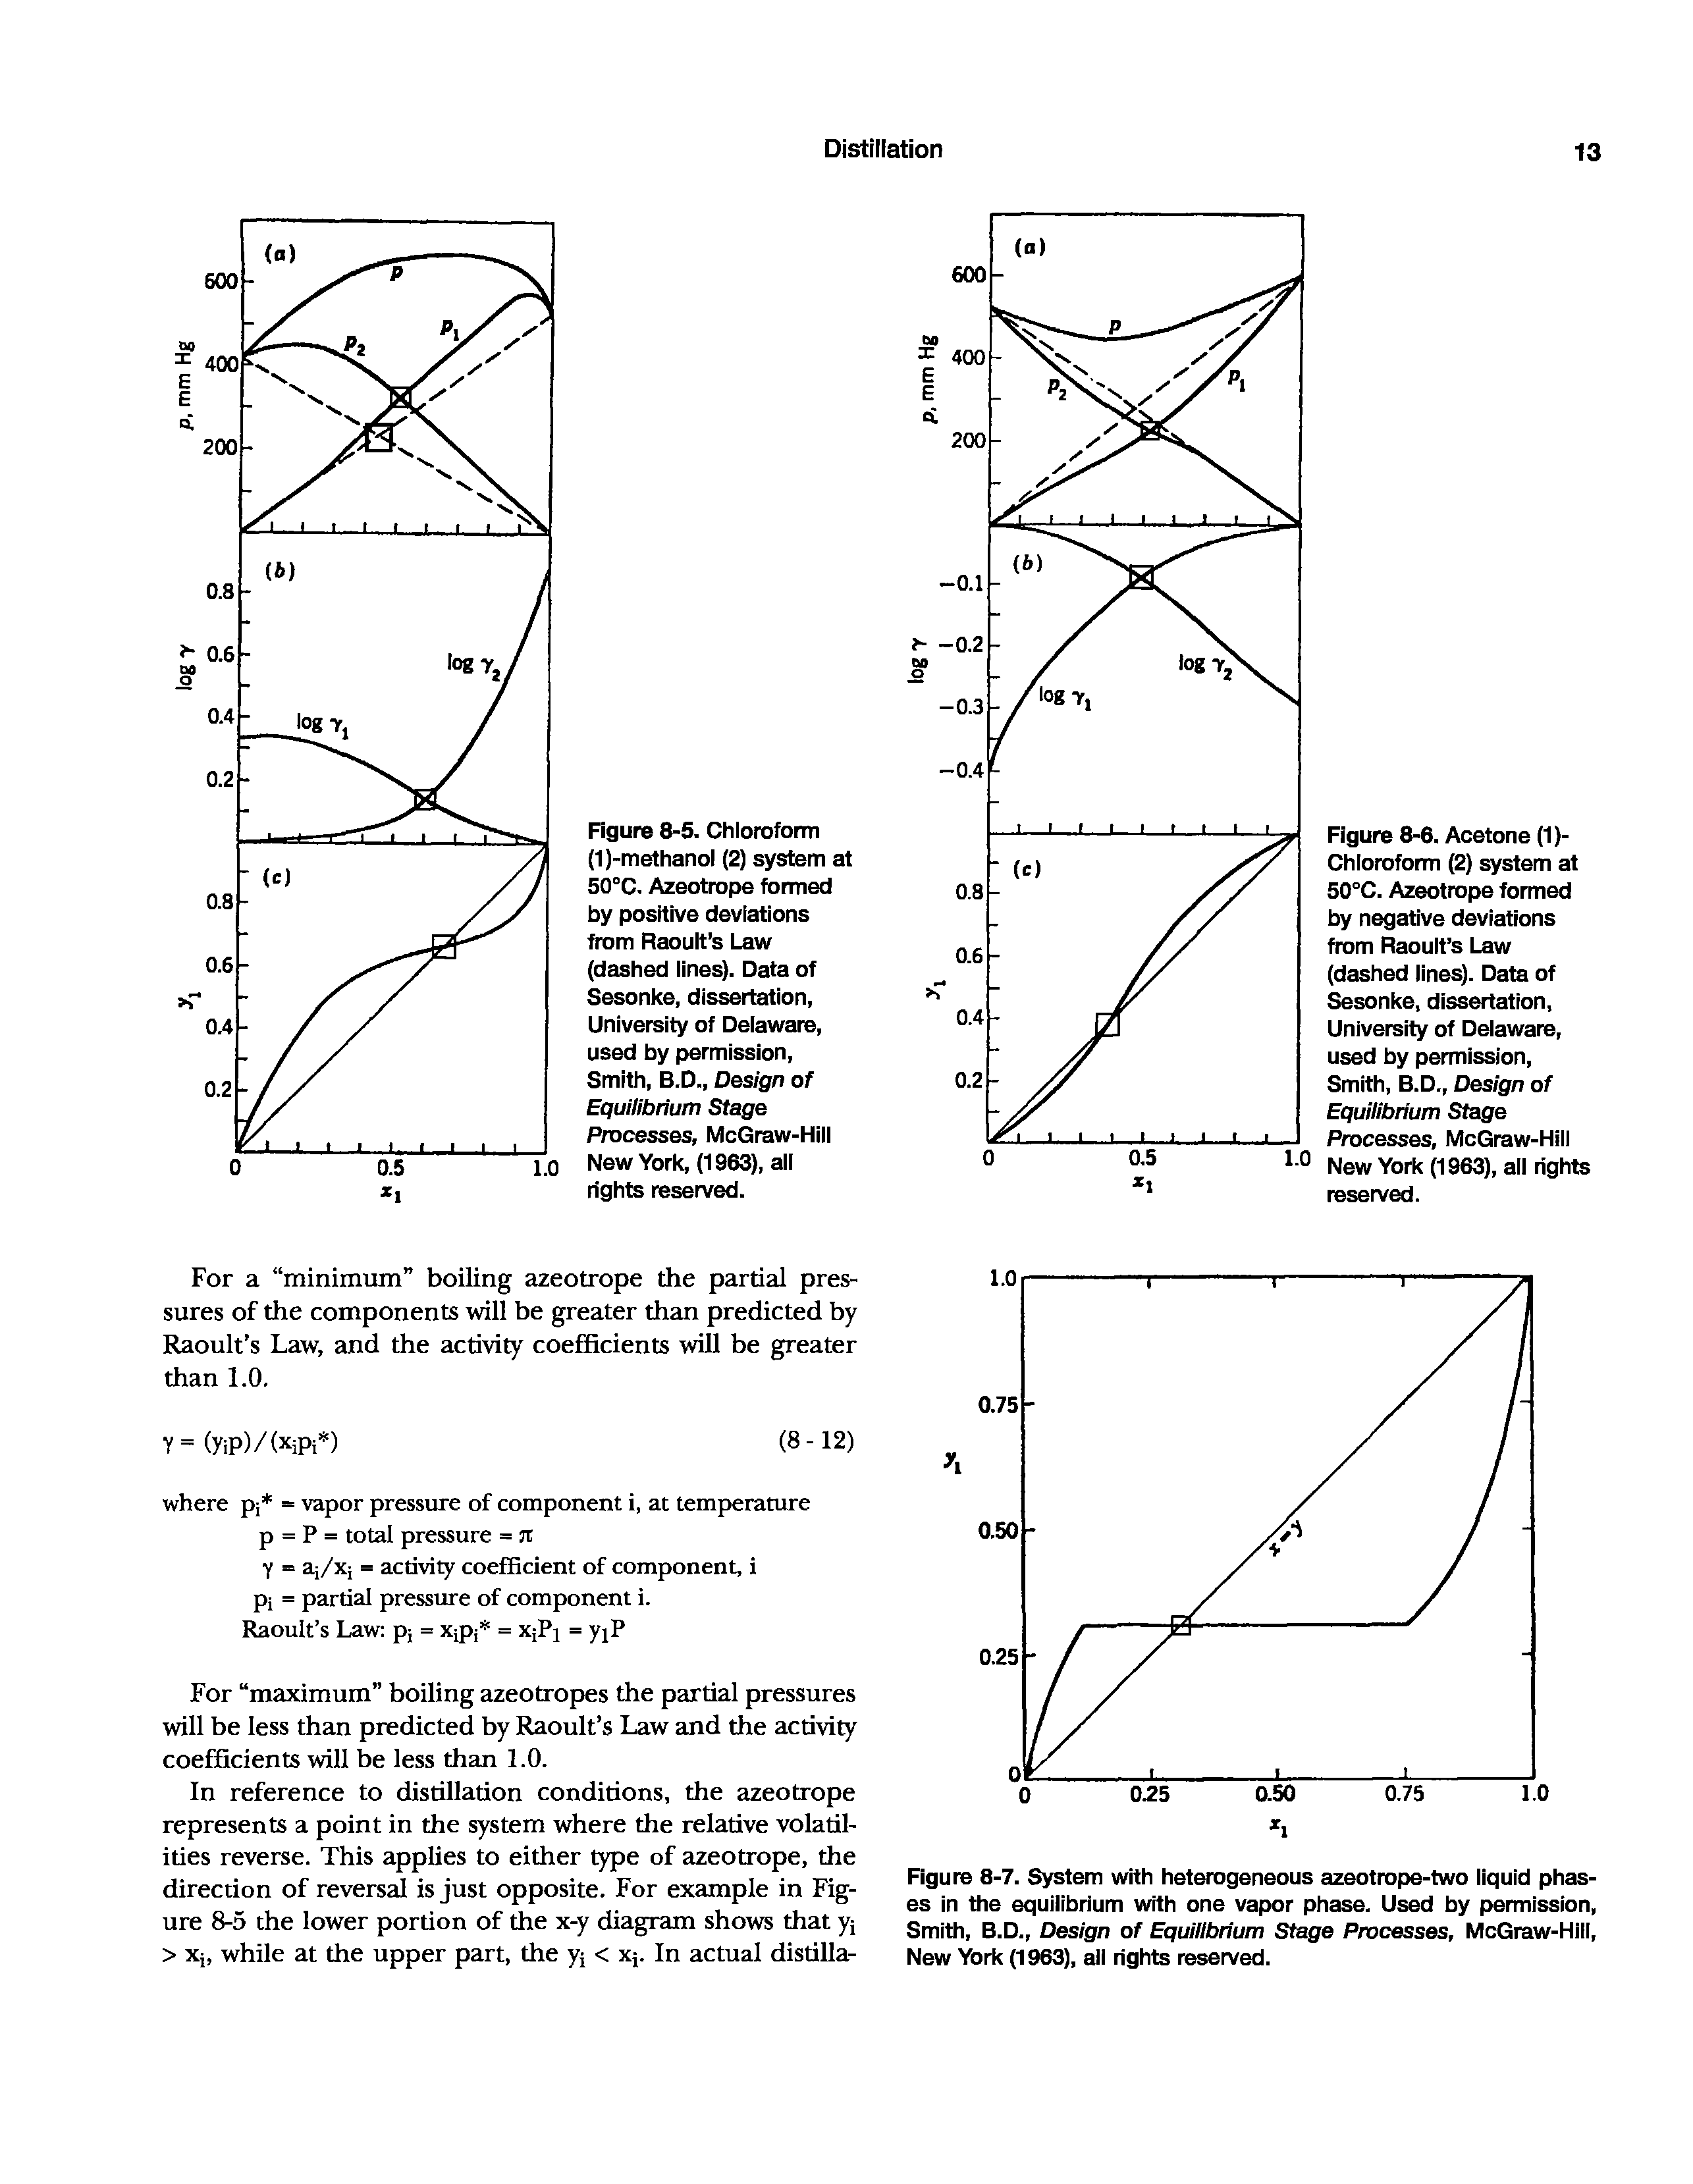 Figure 8-6. Acetone (1)-Chloroform (2) system at 50°C. Azeotrope formed by negative deviations from Raoult s Law (dashed lines). Data of Sesonke, dissertation. University of Delaware, used by permission. Smith, B.D., Design of Equilibrium Stage Processes, McGraw-Hill New York (1963), all rights reserved.